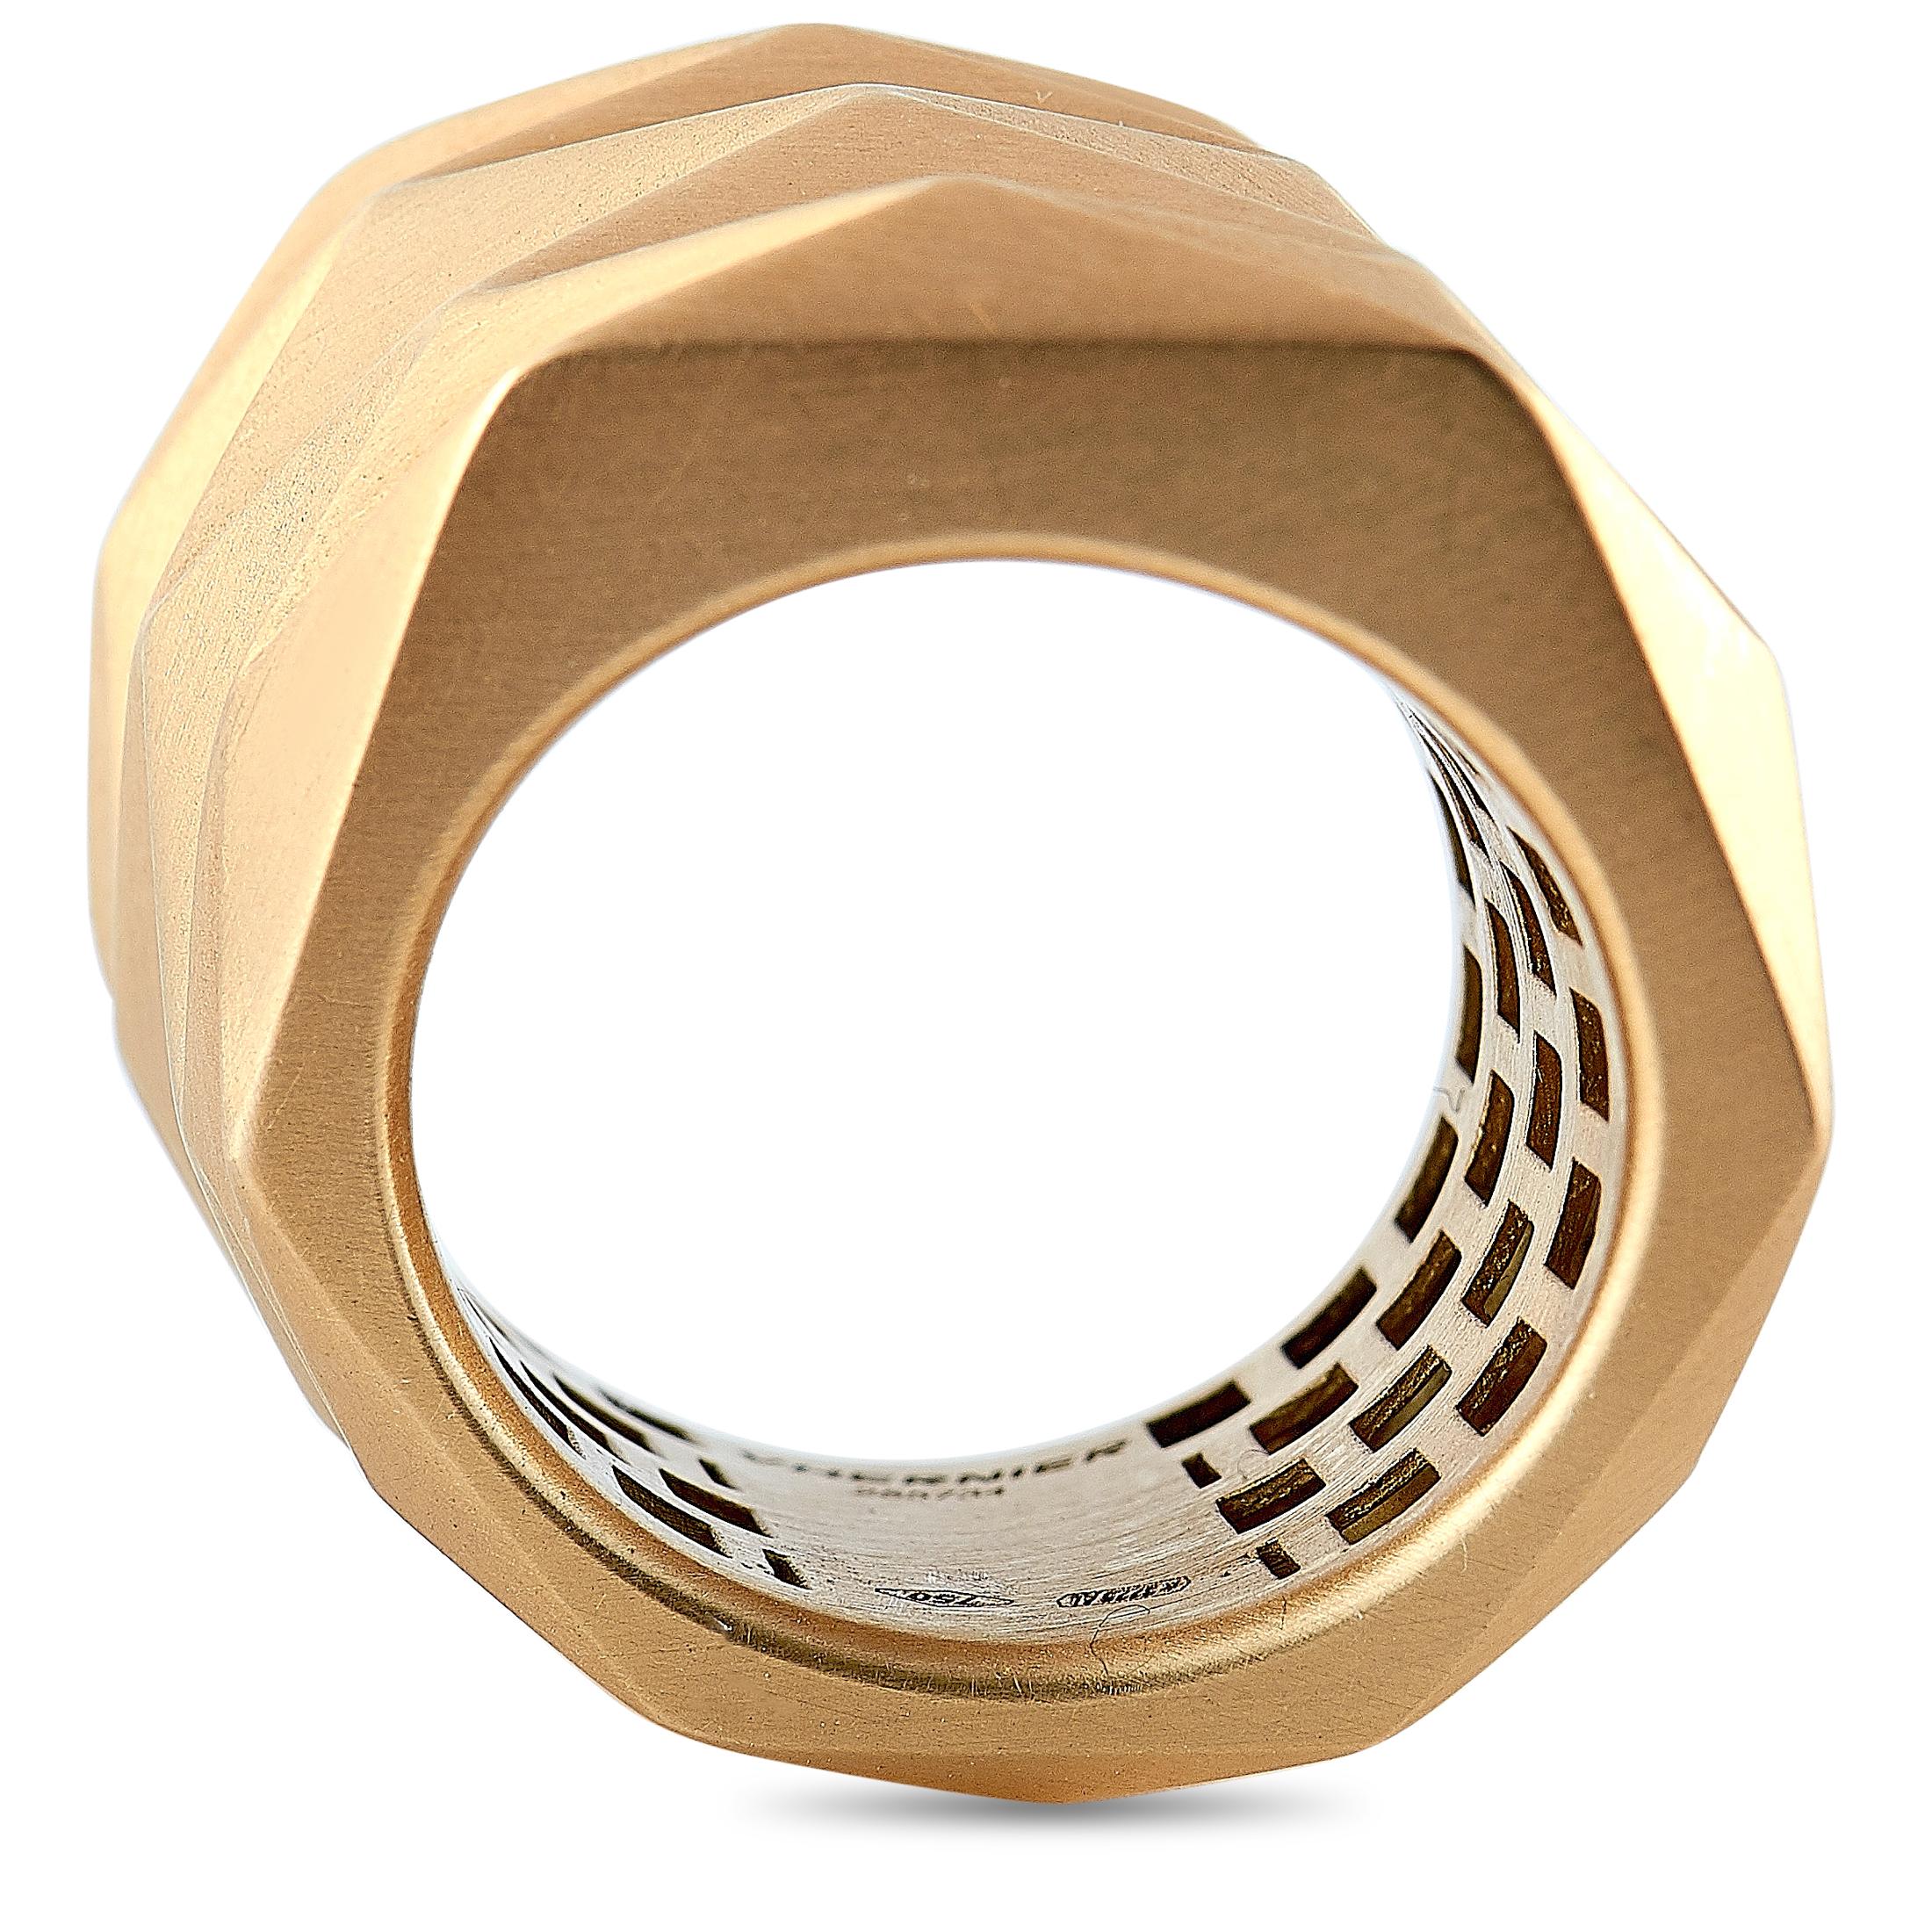 The Vhernier “Plissé” ring is made of satin-finished 18K rose gold and weighs 17 grams, boasting band thickness of 12 mm and top height of 4 mm.
Ring Size: 5.5

This item is offered in brand new condition and includes the manufacturer’s box.